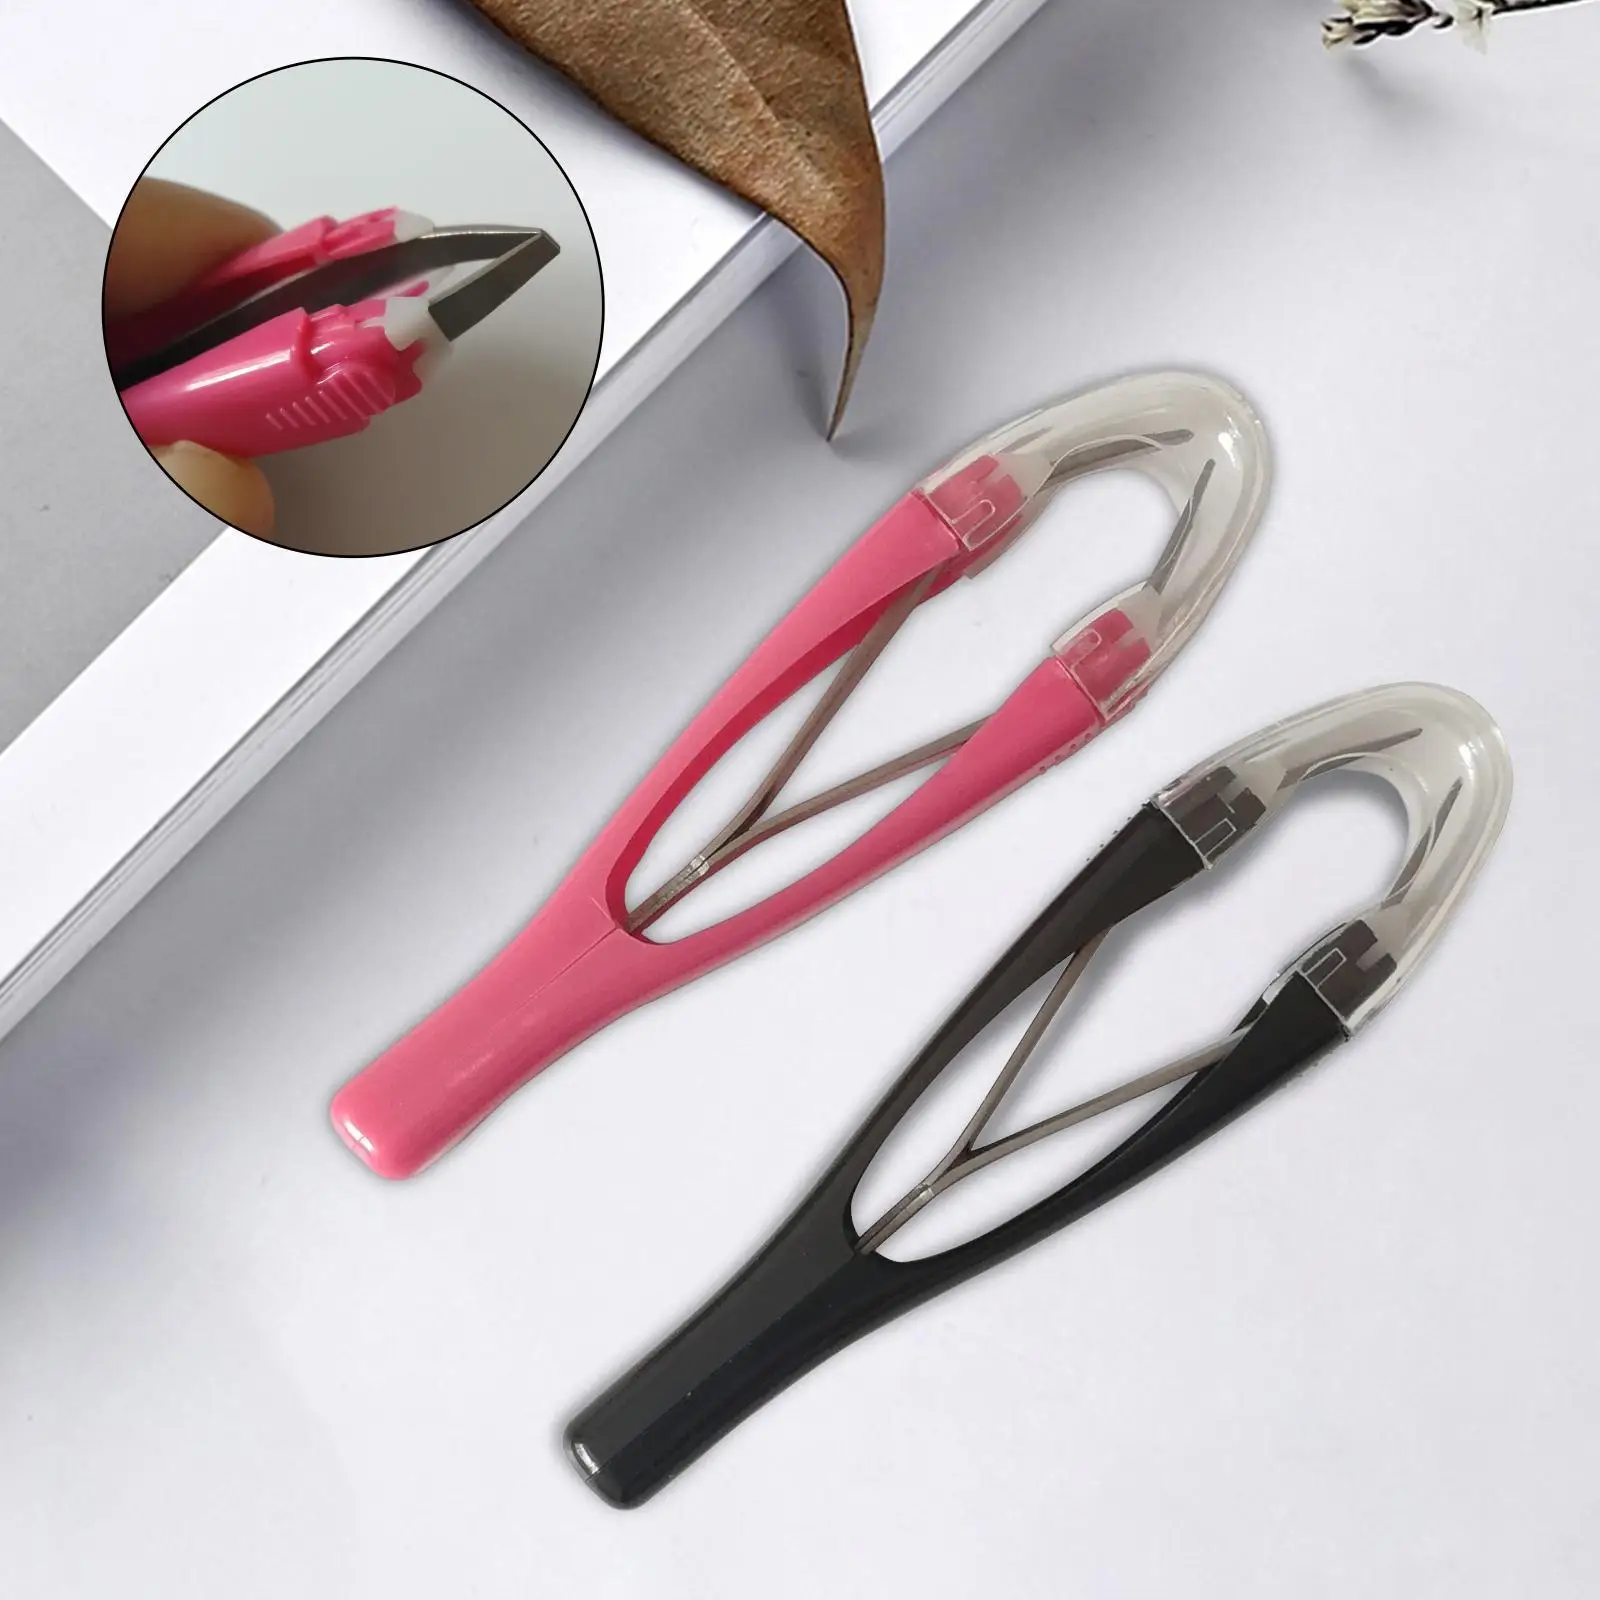 Eyebrow Tweezers Slant Tip Cosmetic Beauty Tool Professional Retractable Makeup Supplies Eyebrow Removal Clip for Home Beginners